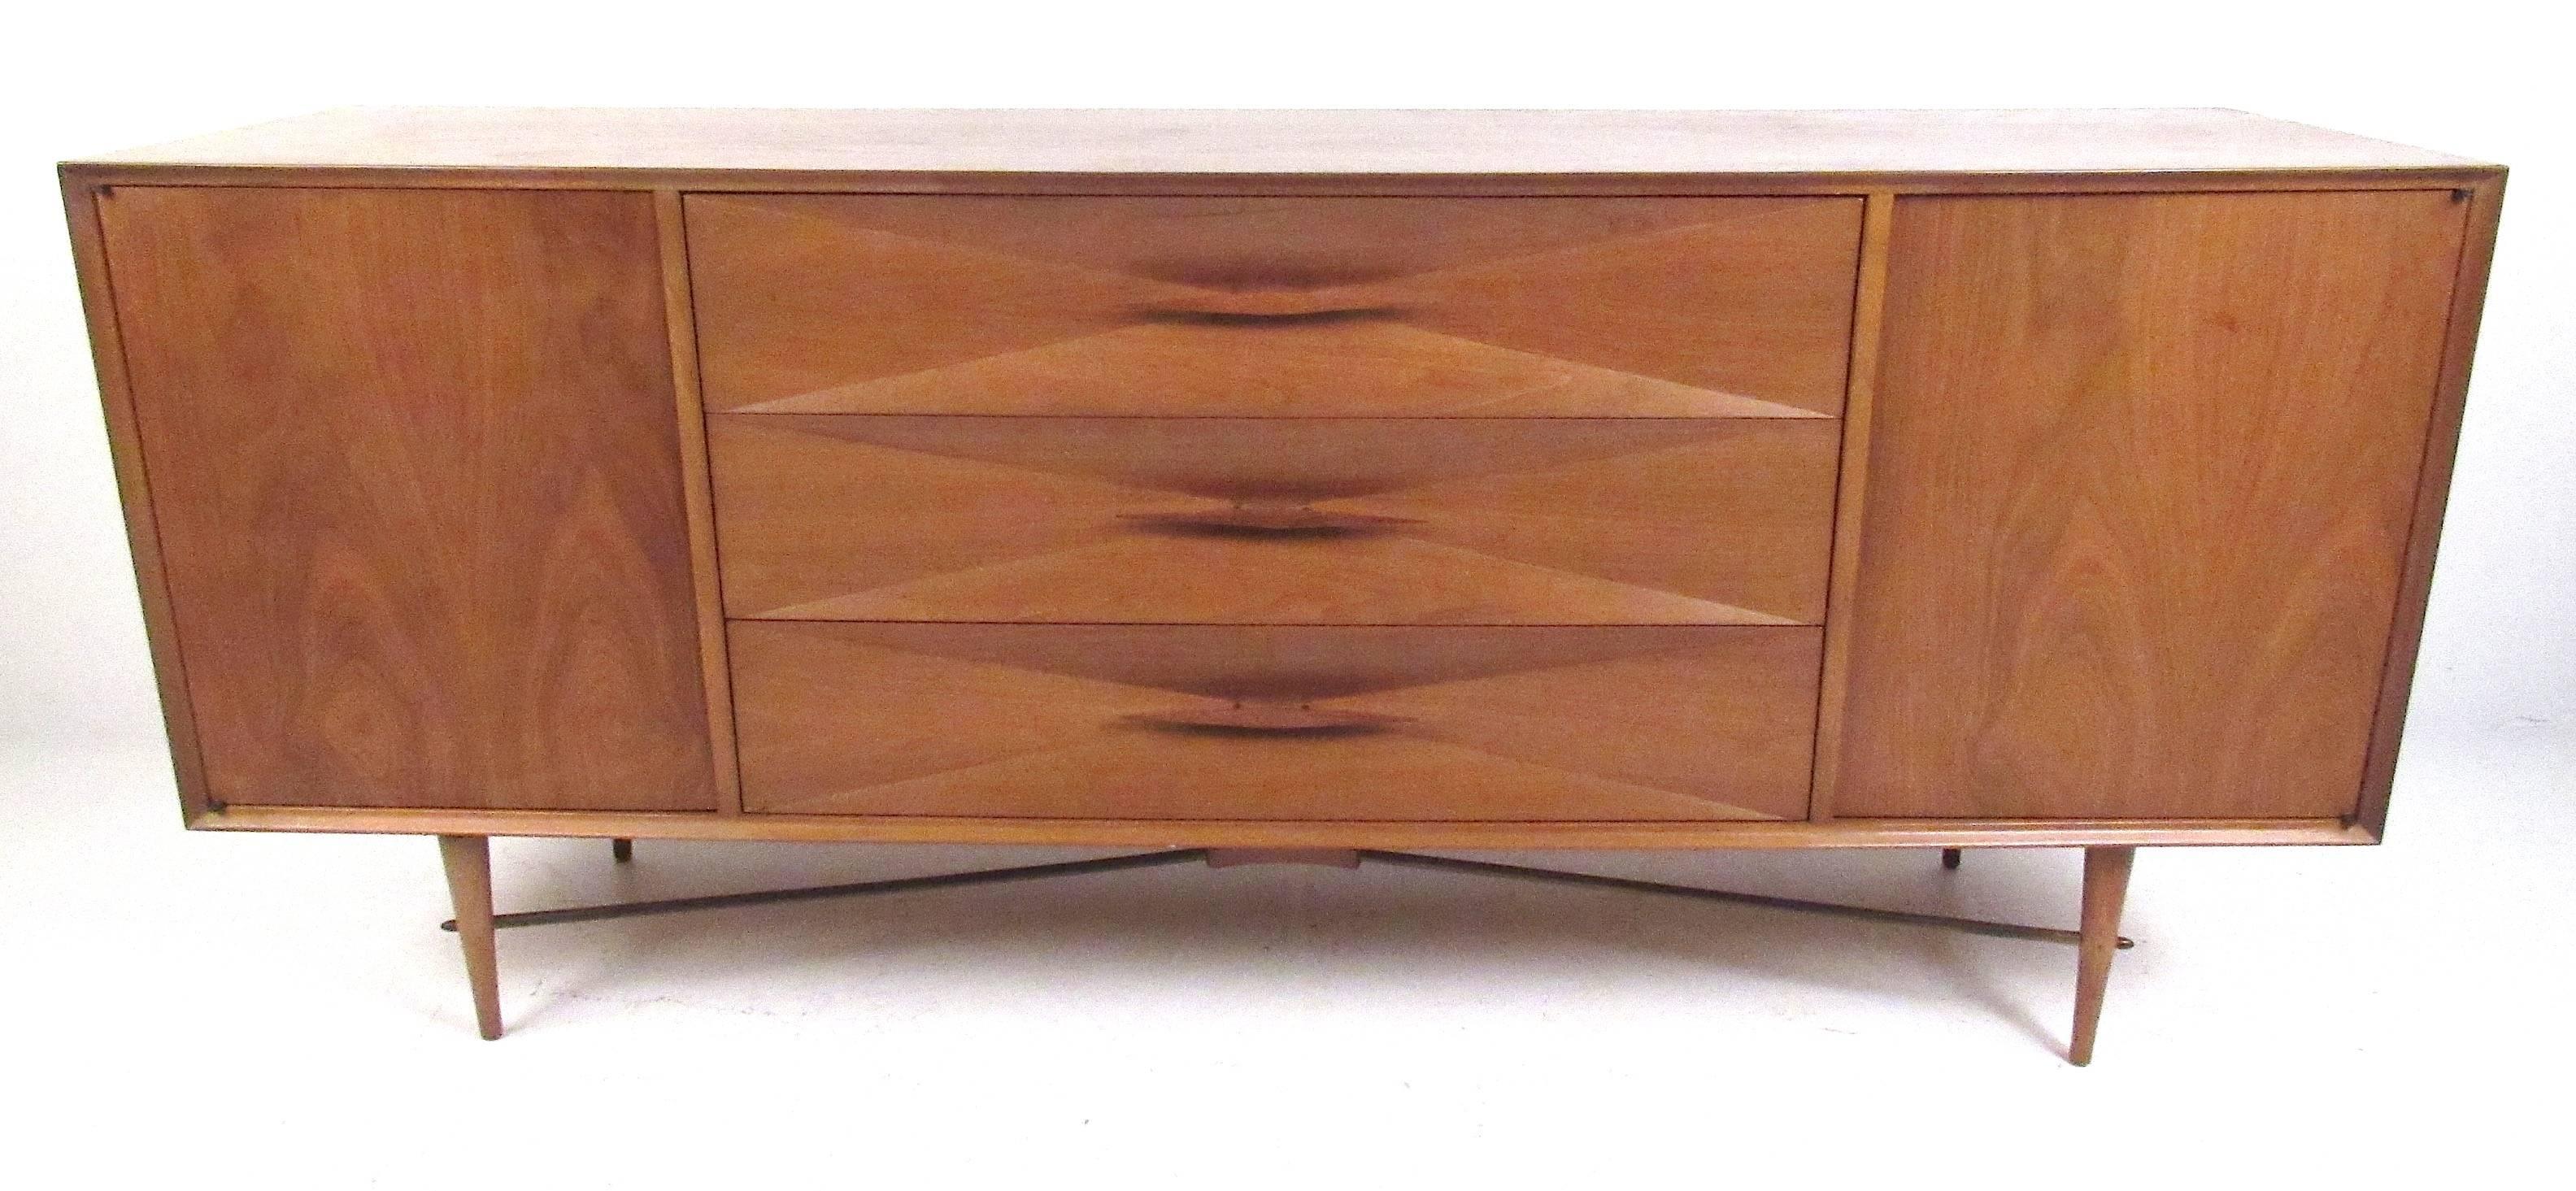 Sculptural nine-drawer diamond front dresser with rare brass stretcher attributed to Albert Parvin, circa 1950s. Please confirm item location (NY or NJ) with dealer.